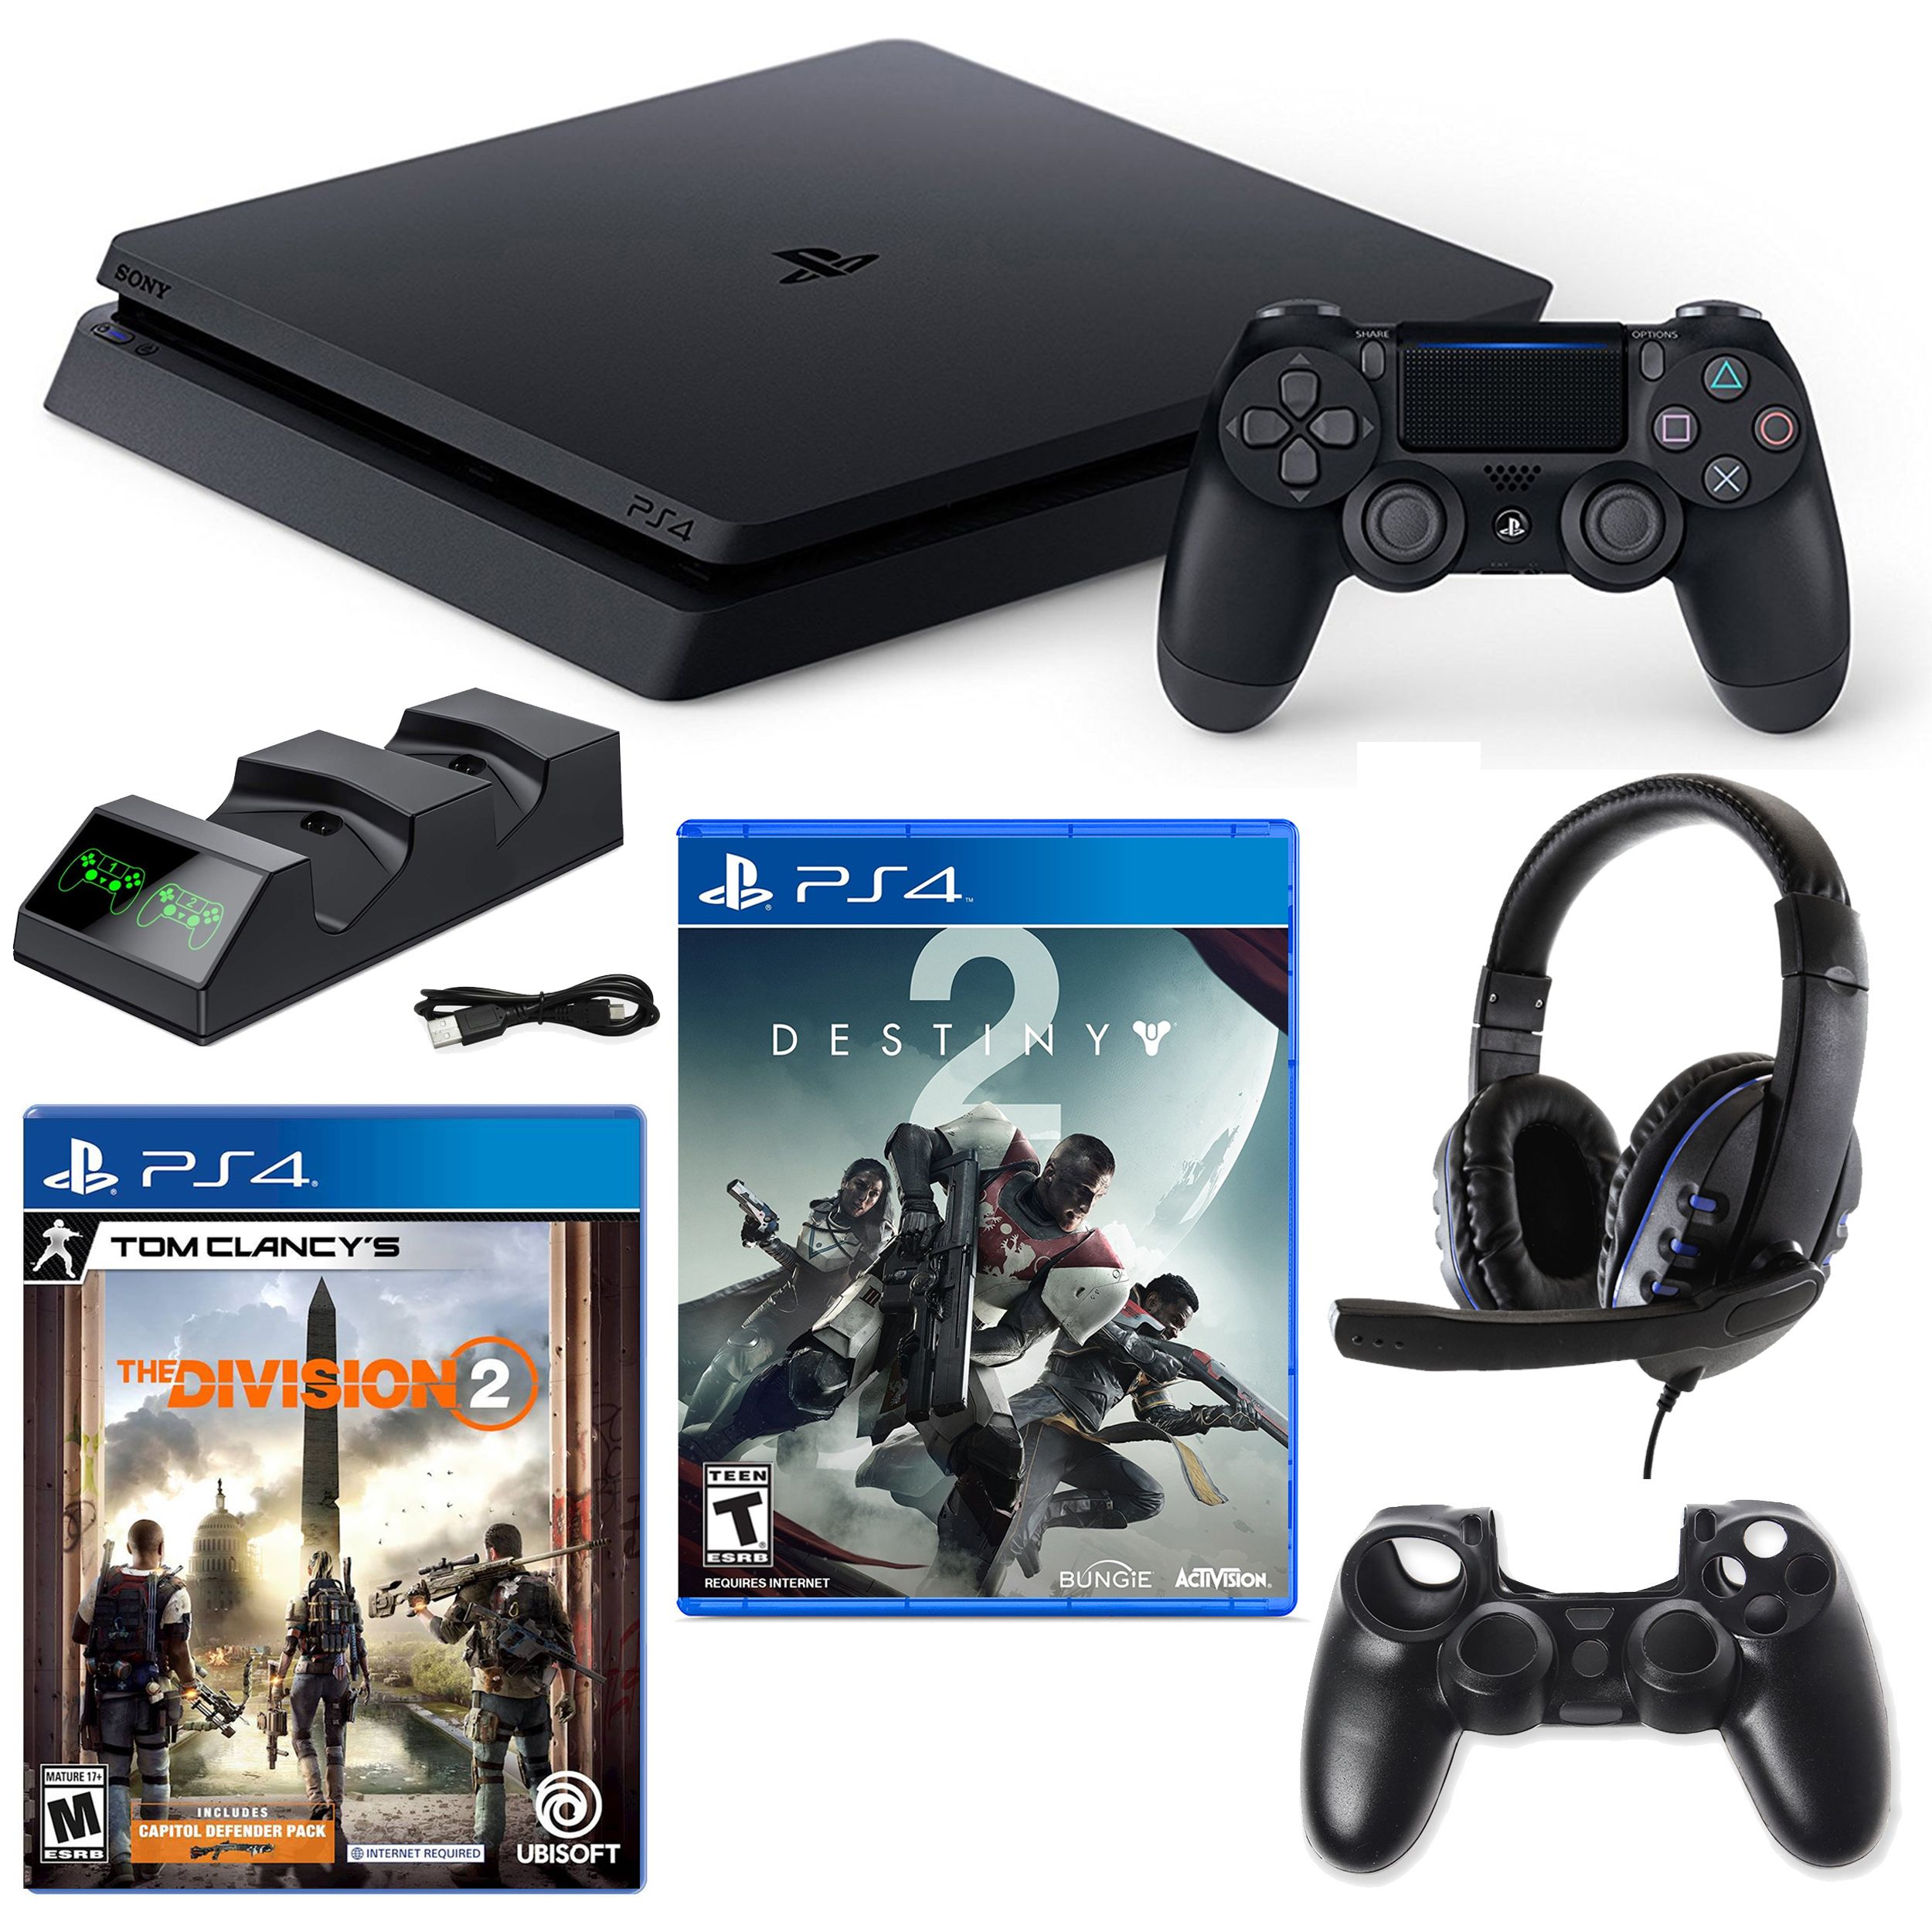 Sony PlayStation 4 Slim 1TB Console Bundle with Accessories Kit, Tom  Clancy's The Division 2 and Destiny 2